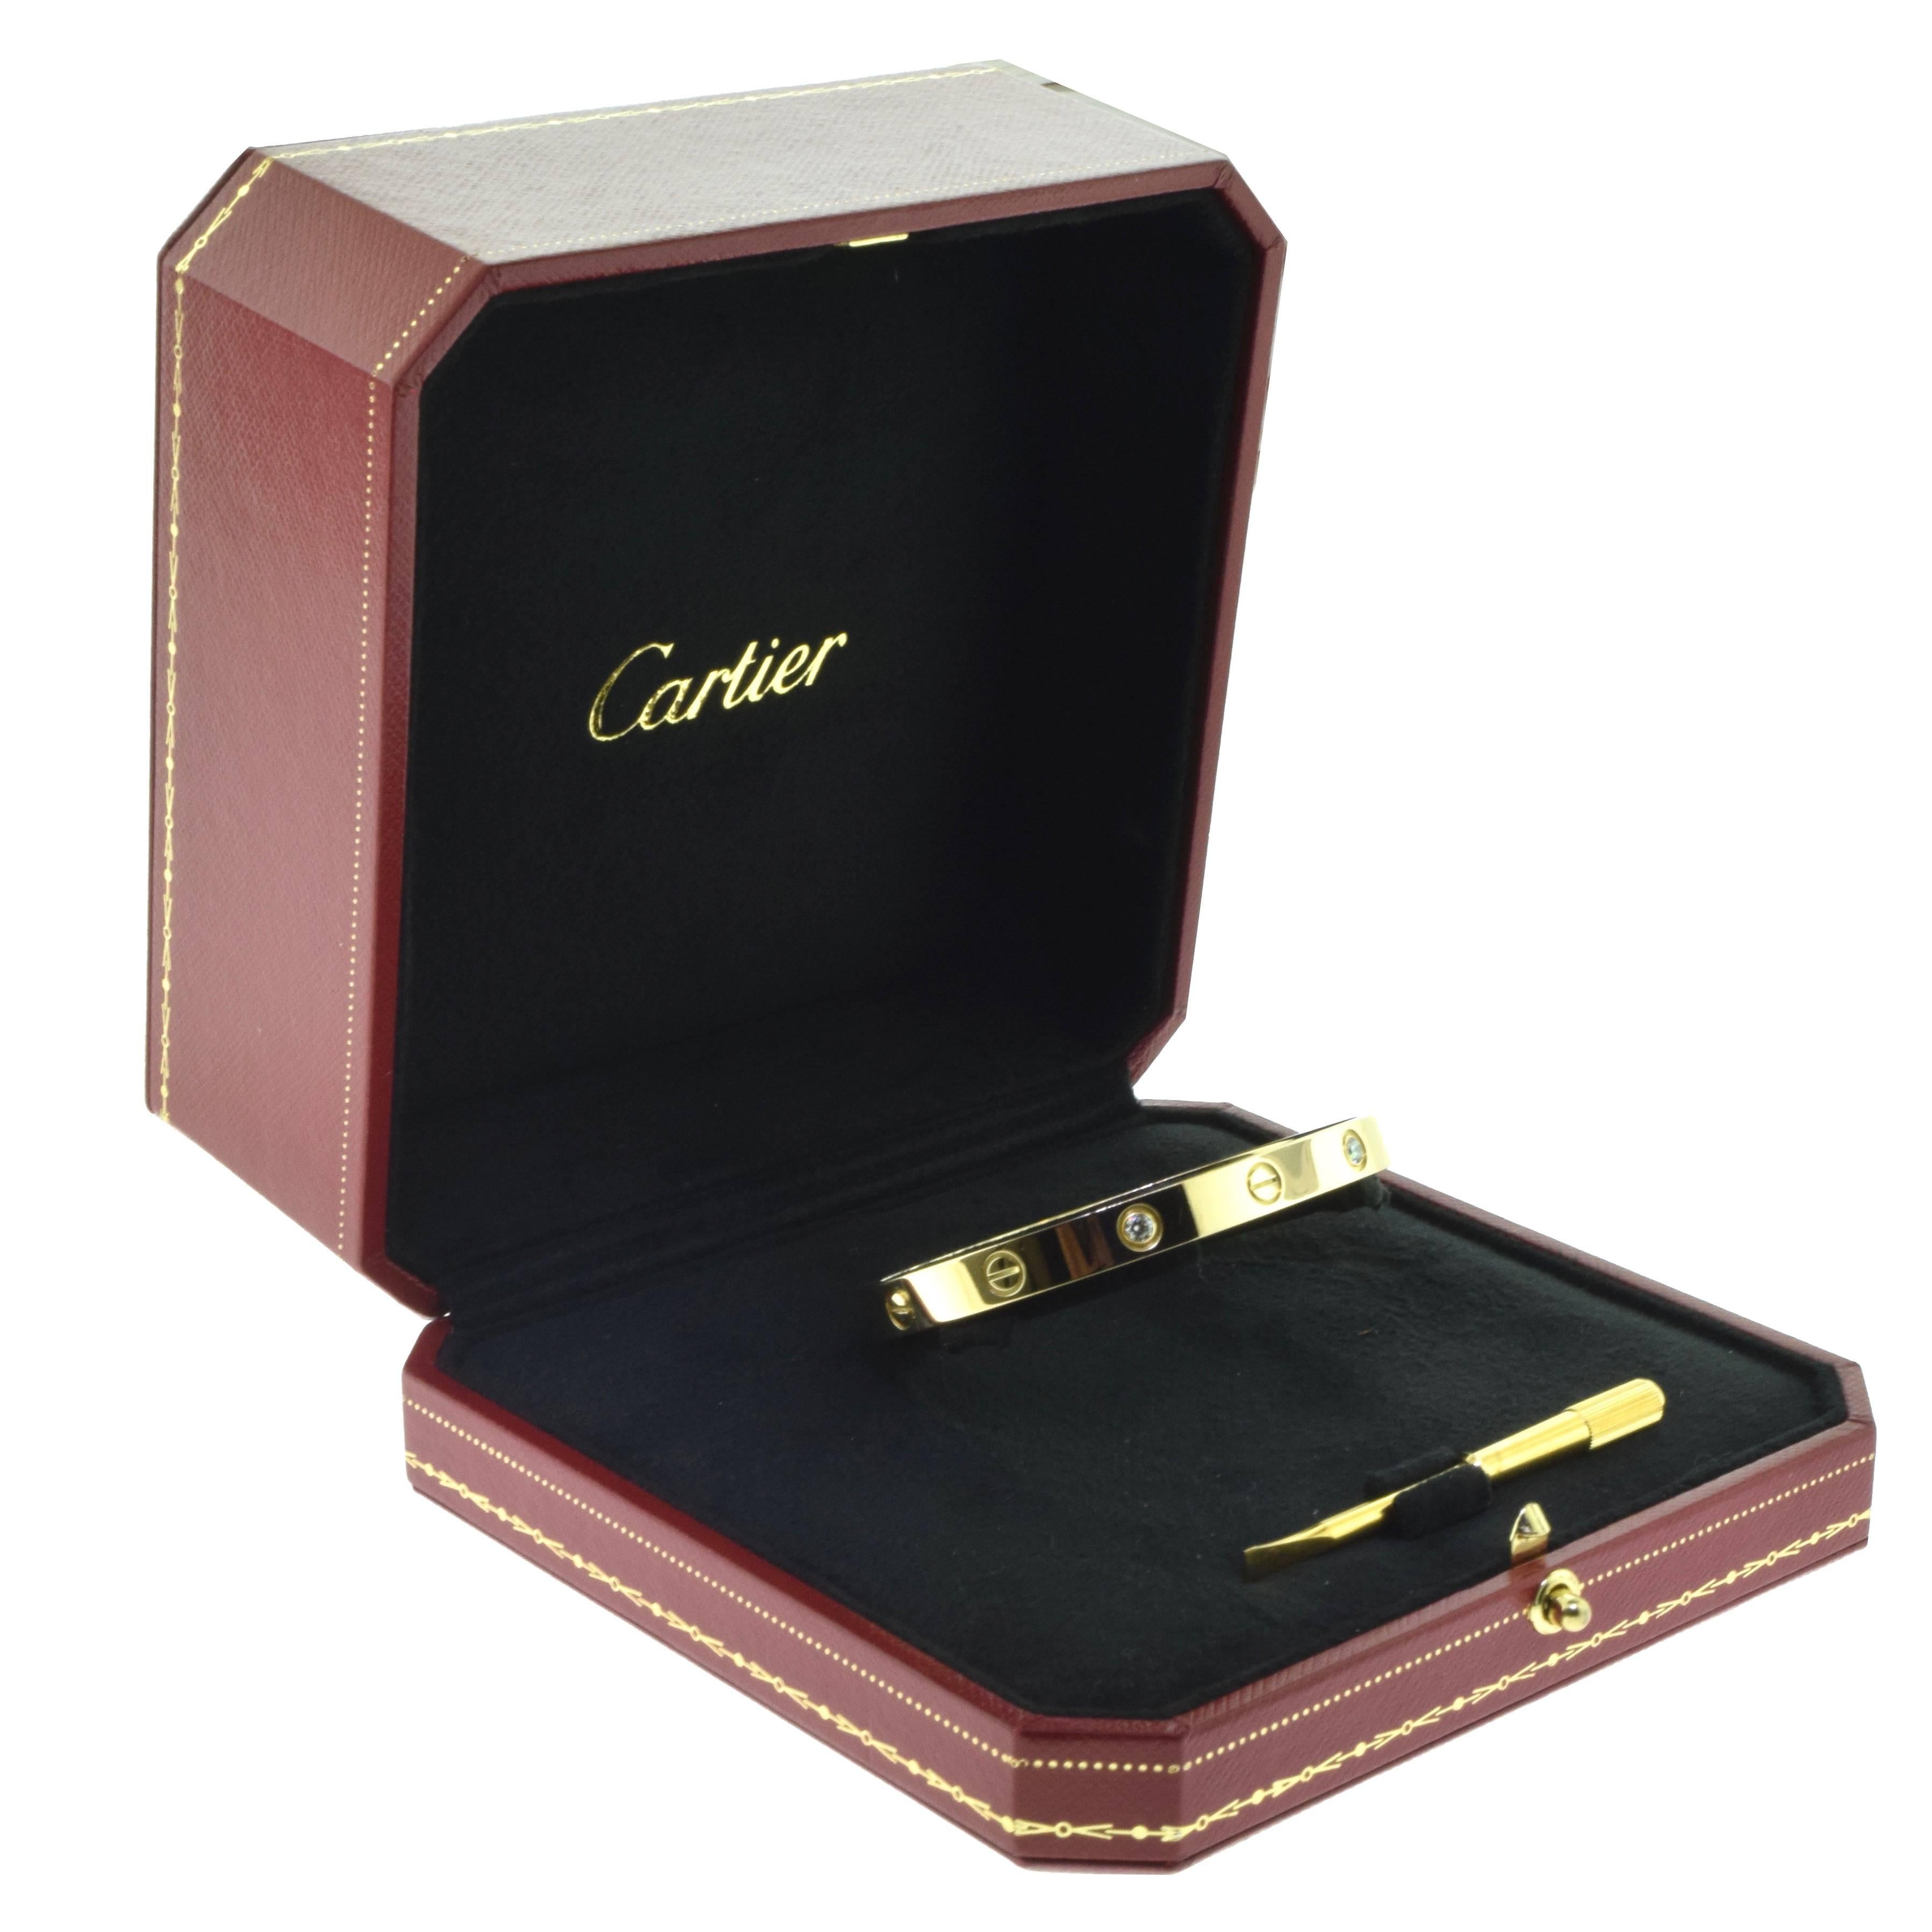 From Cartier's LOVE collection:
Bracelet Size: 17 = 17 cm   
Metal: 18 Karat Yellow Gold
Stones: 4 Round Brilliant Cut Diamonds 
Total Carat Weight: 0.42 ct
Total Item Weight (g): 30.9
Hallmark: Cartier 750 Serial No. 17
Collateral: Certificate of